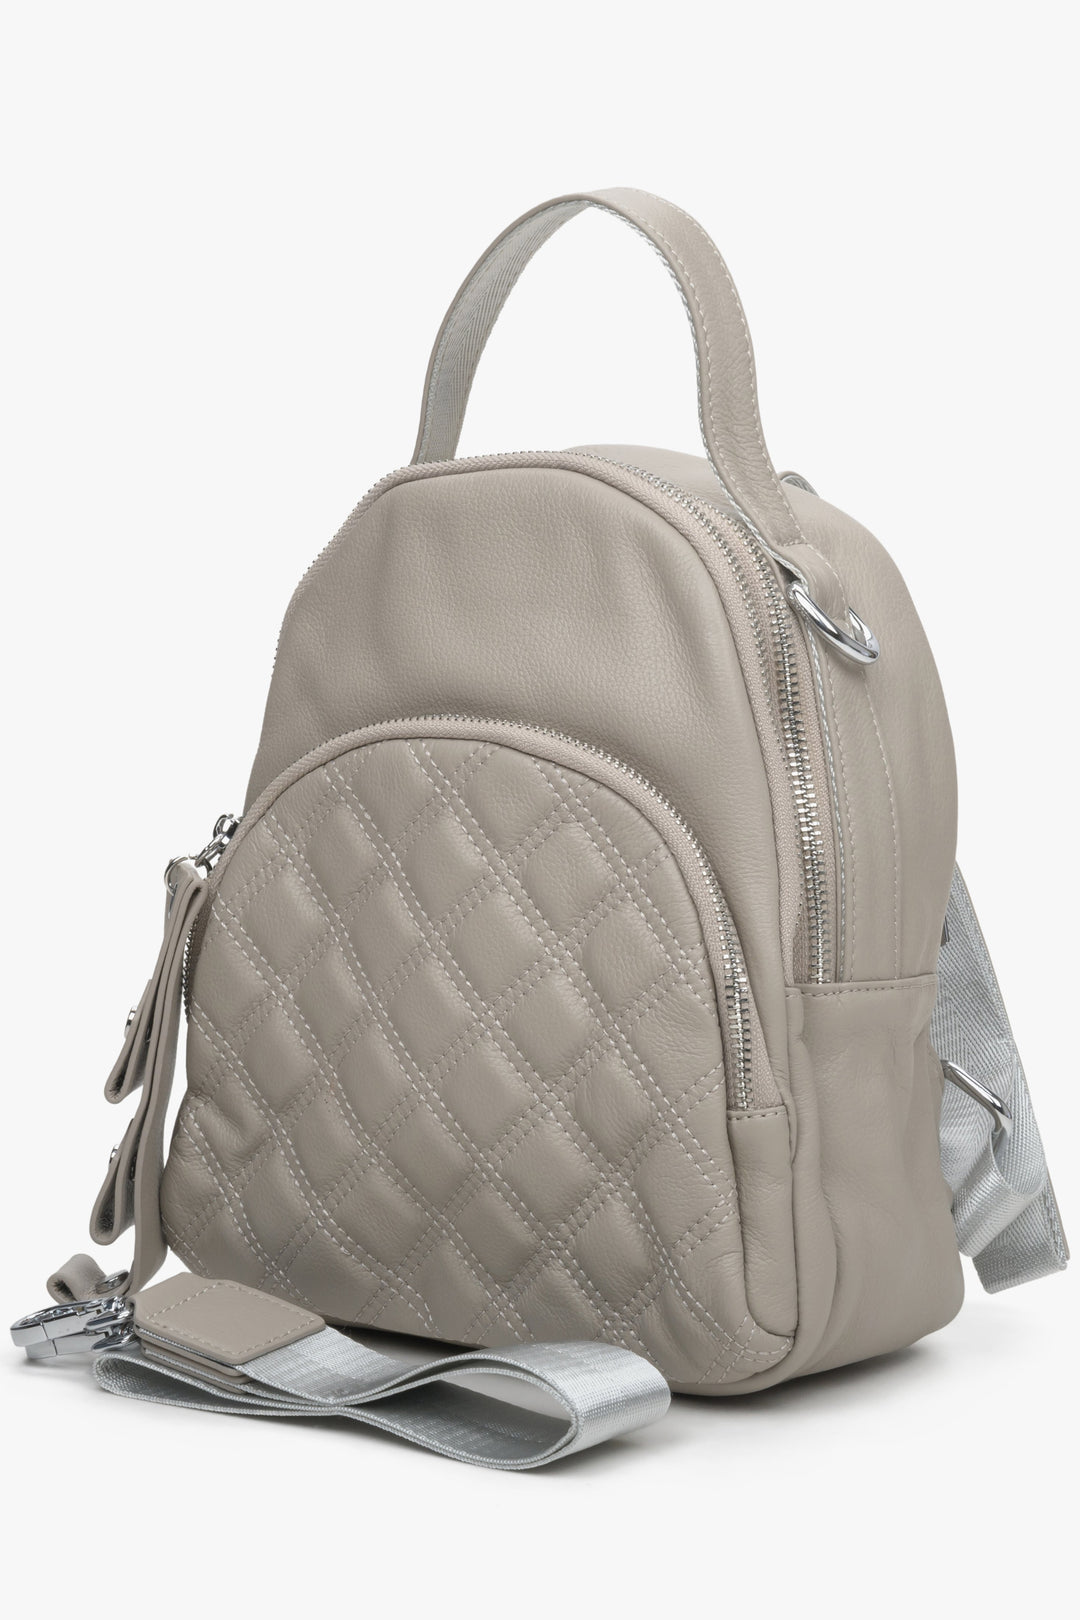 Small, urban women's beige backpack by Estro, perfect for fall - front view of the model.